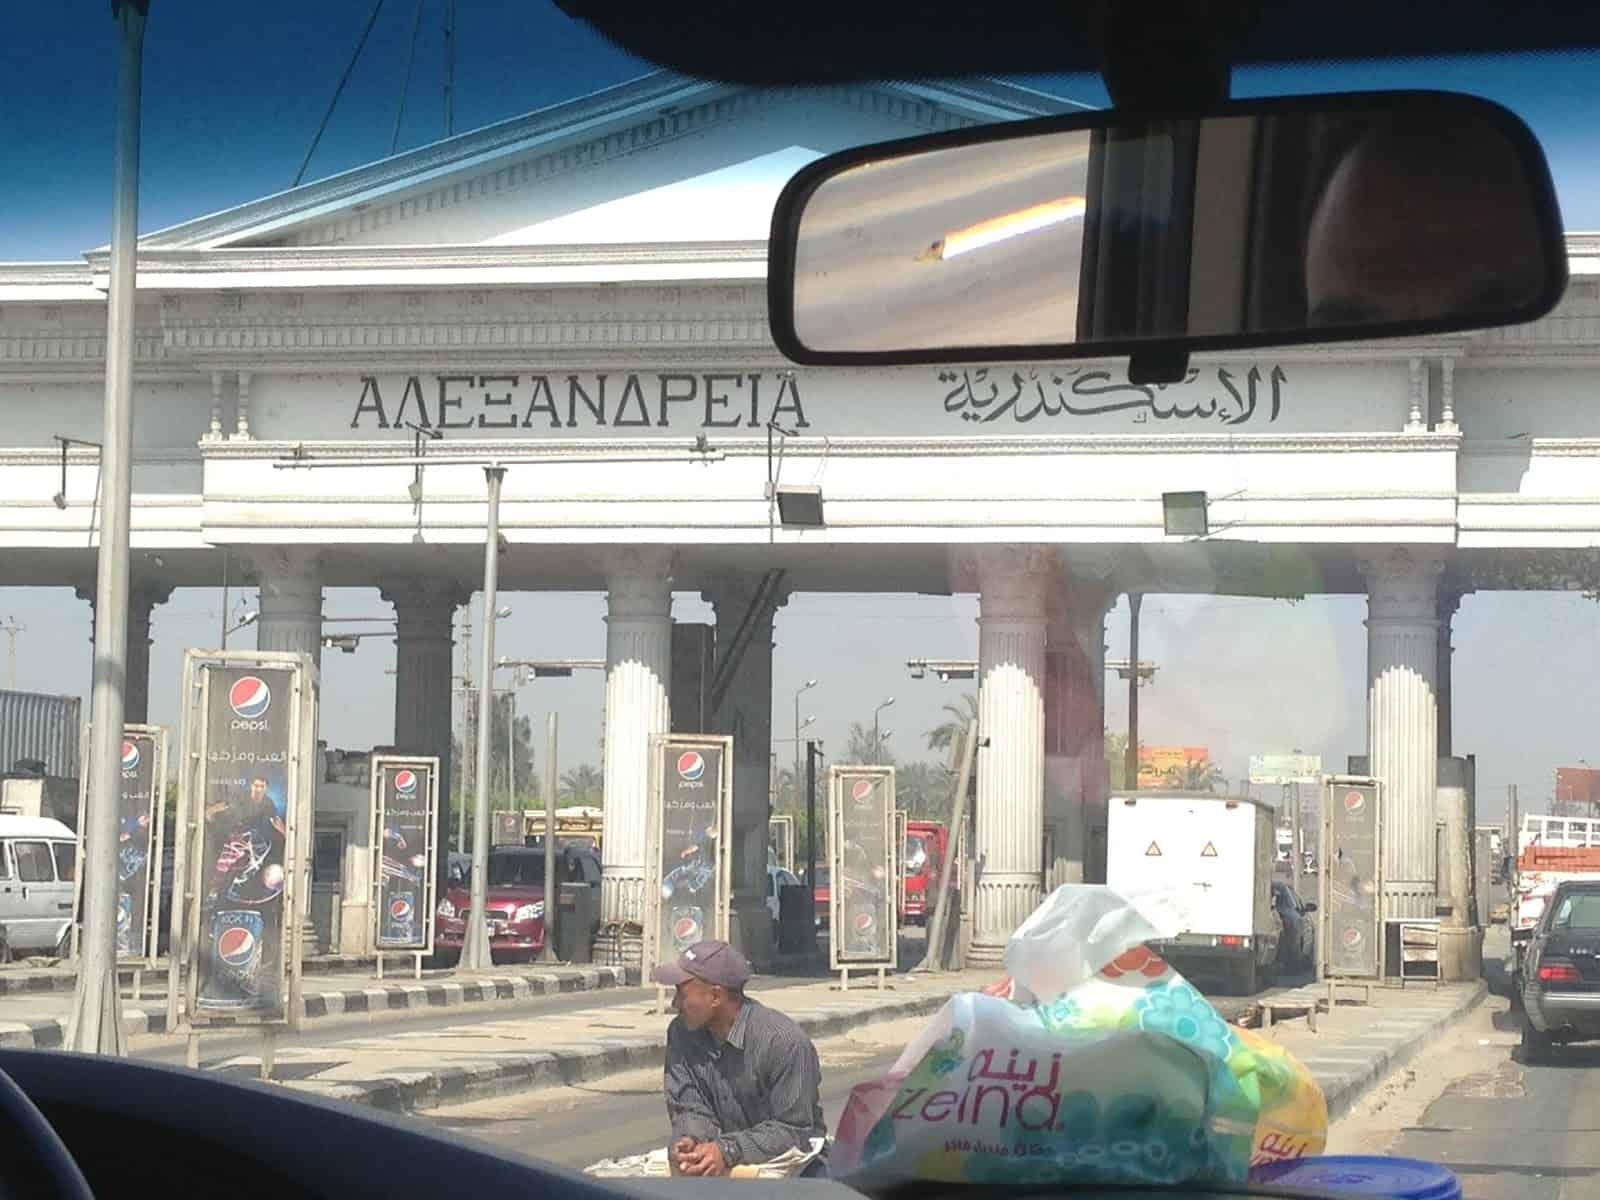 Toll booth entrance to Alexandria, Egypt